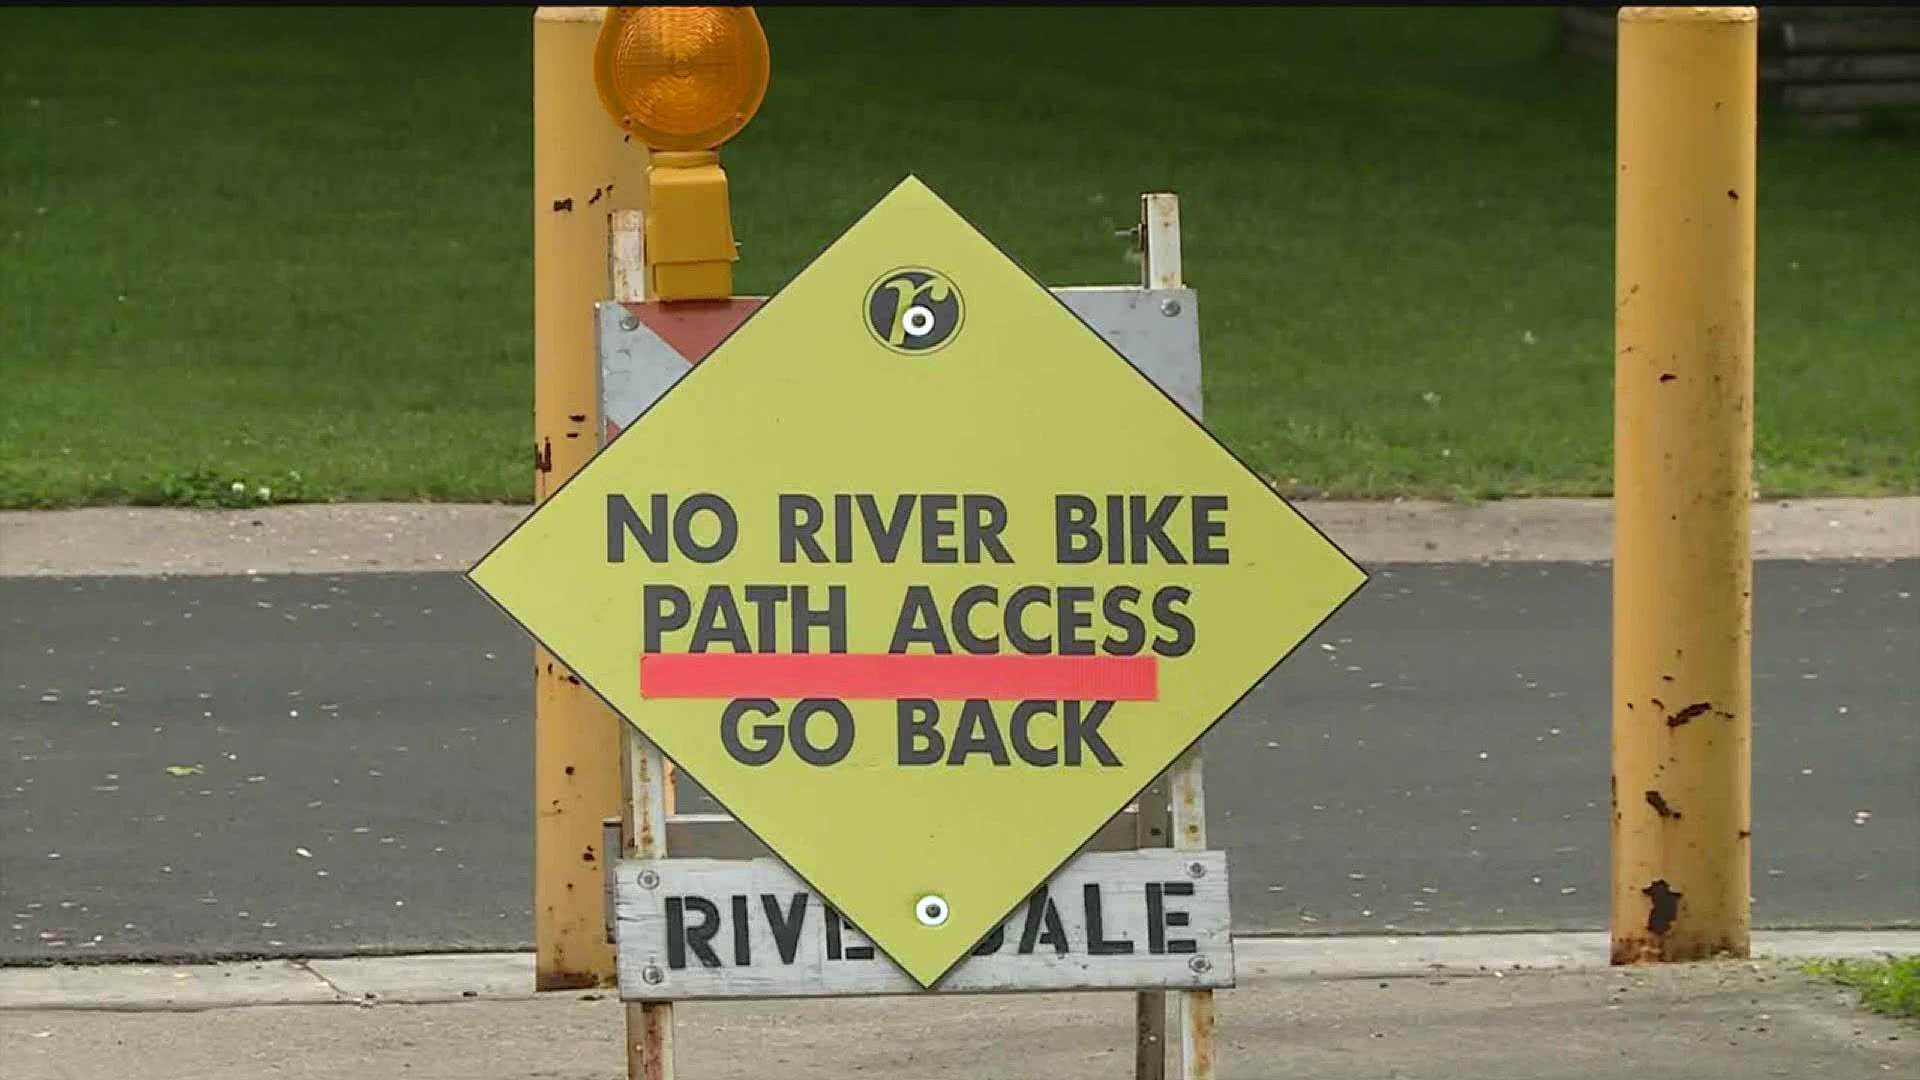 The route was changed to go across US-67, which many bike enthusiasts are wary of.